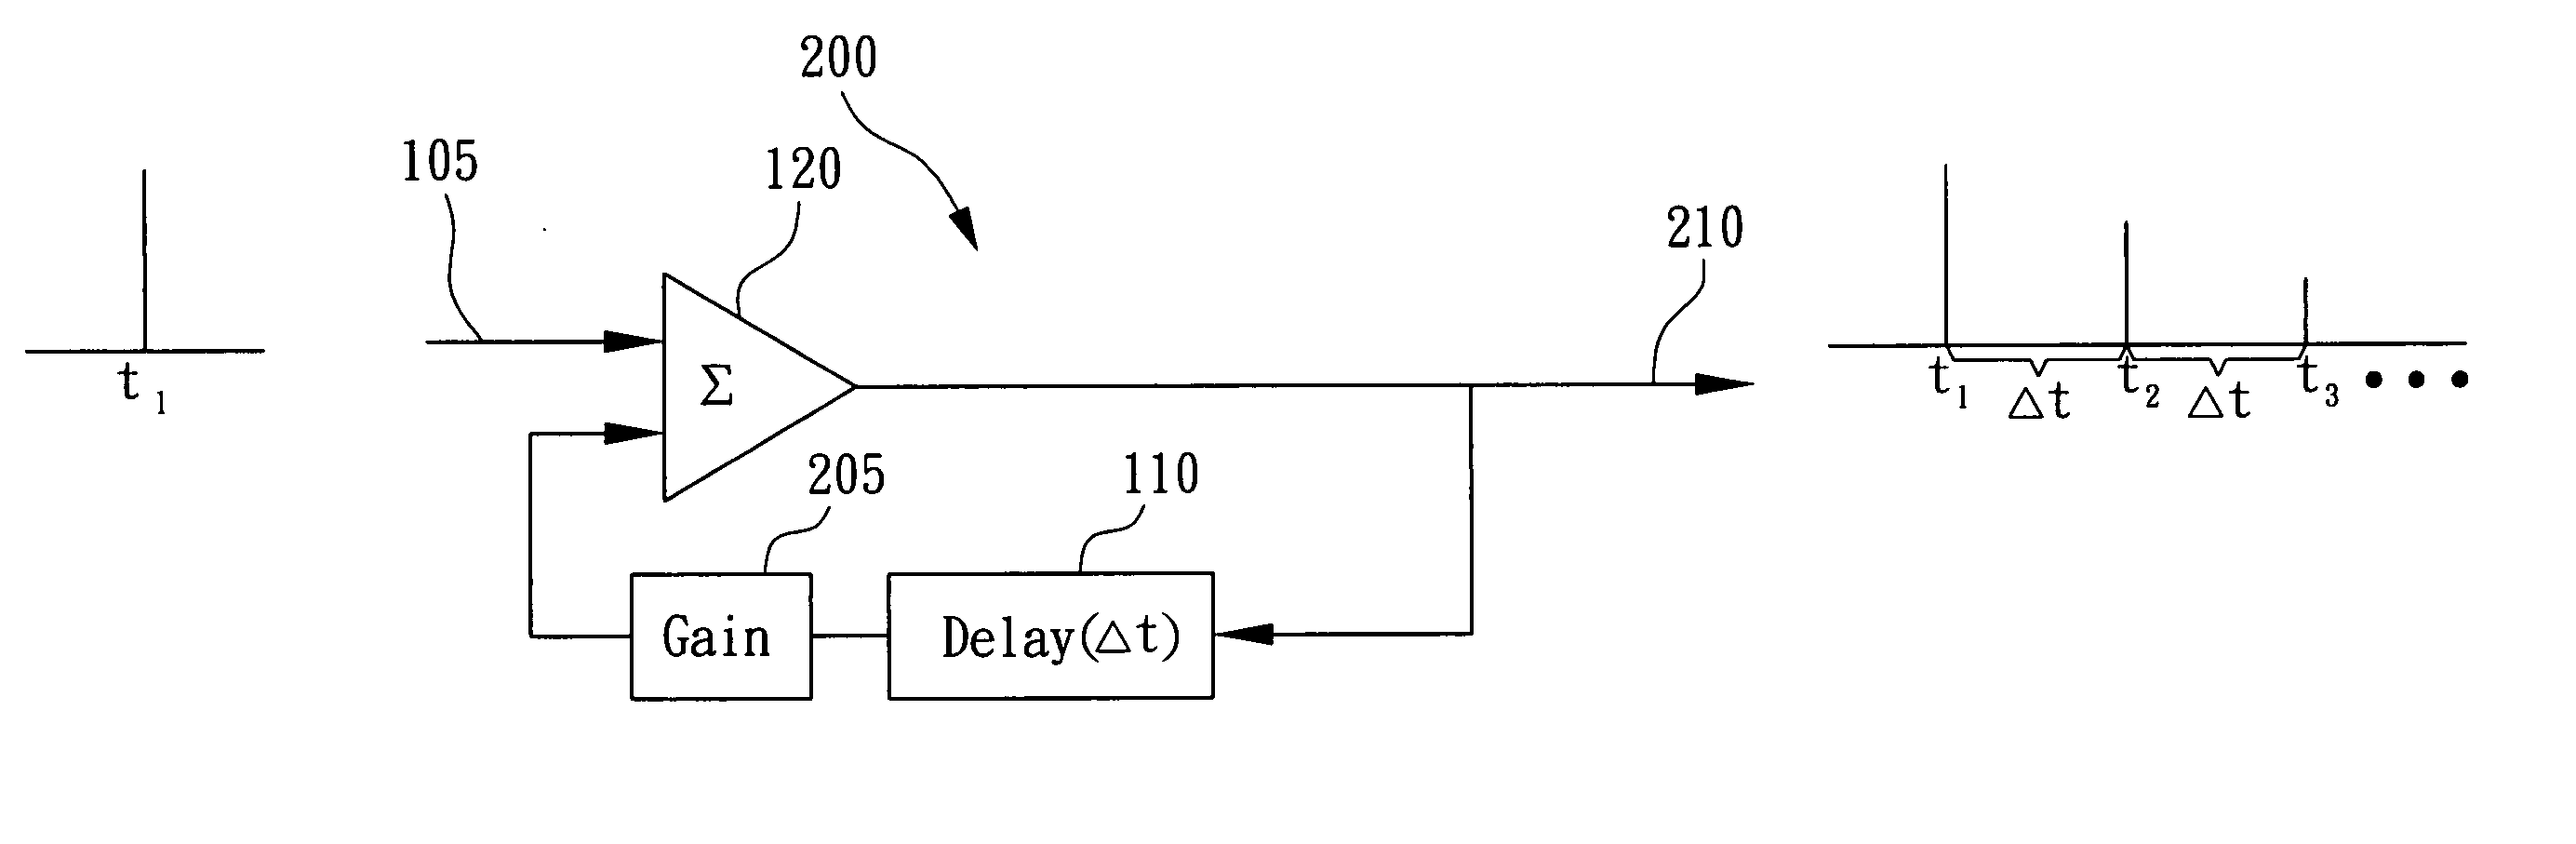 Method and apparatus for emulating audio effect